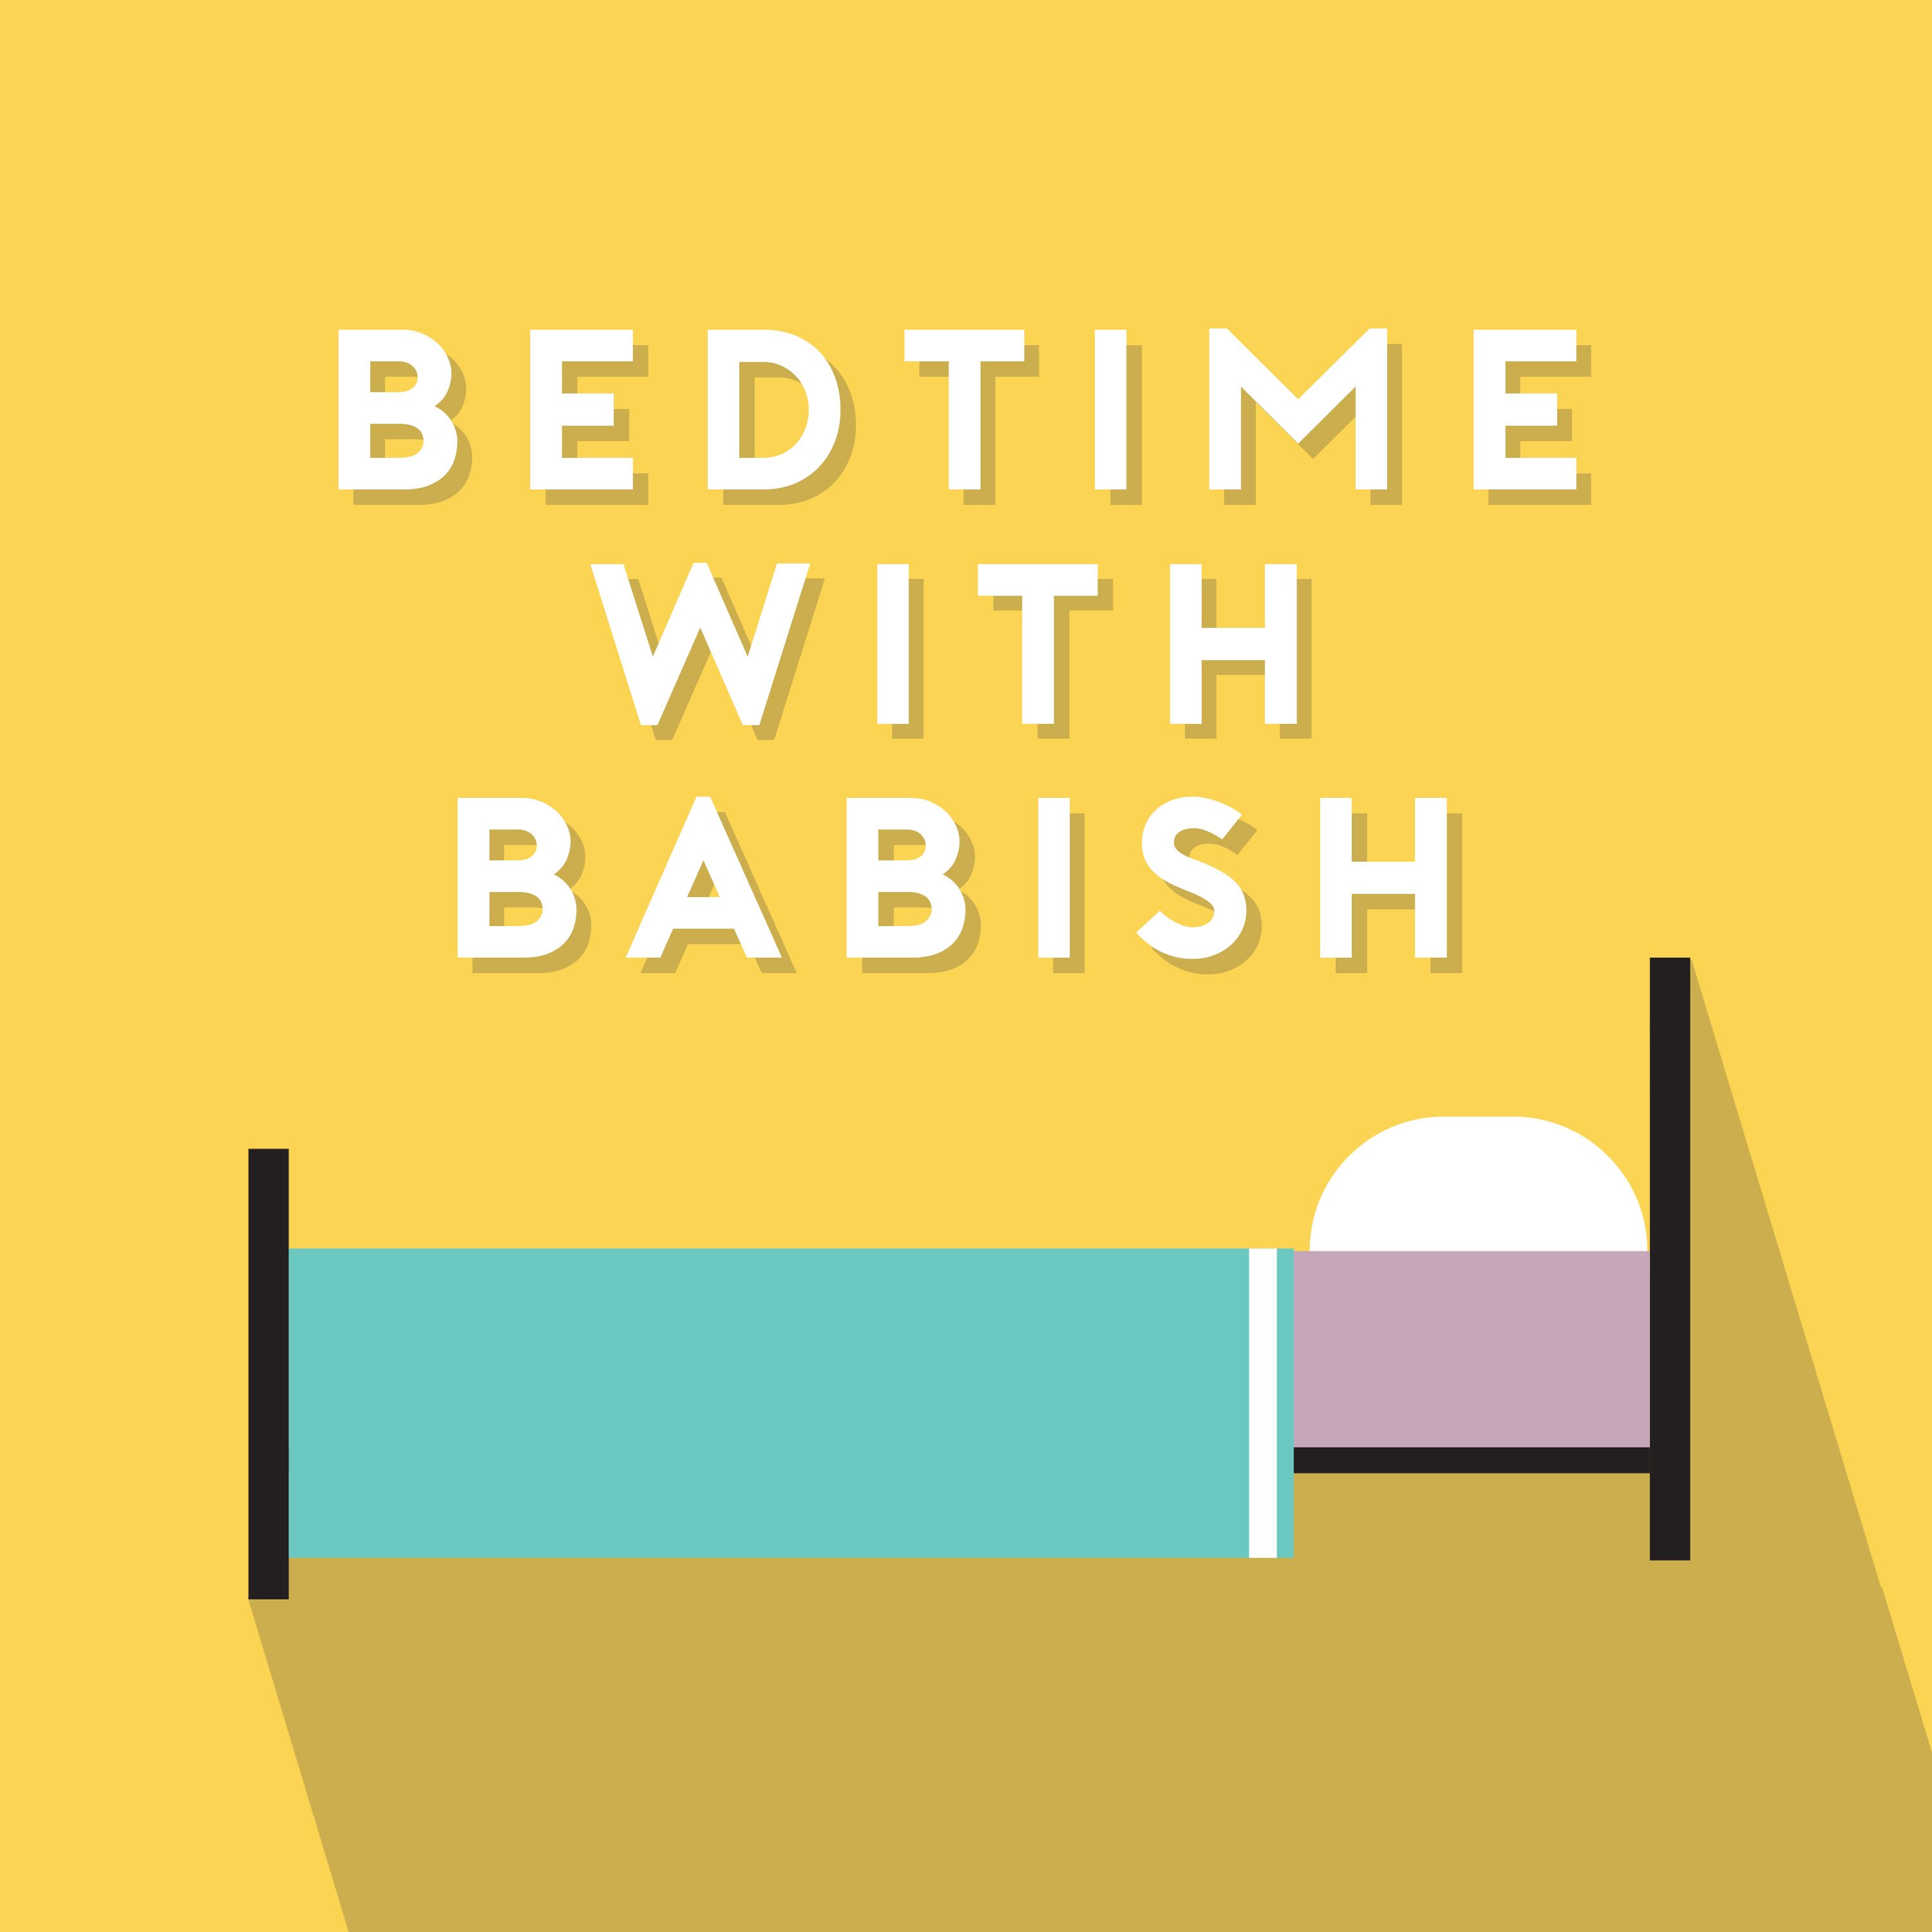 Bedtime with Babish